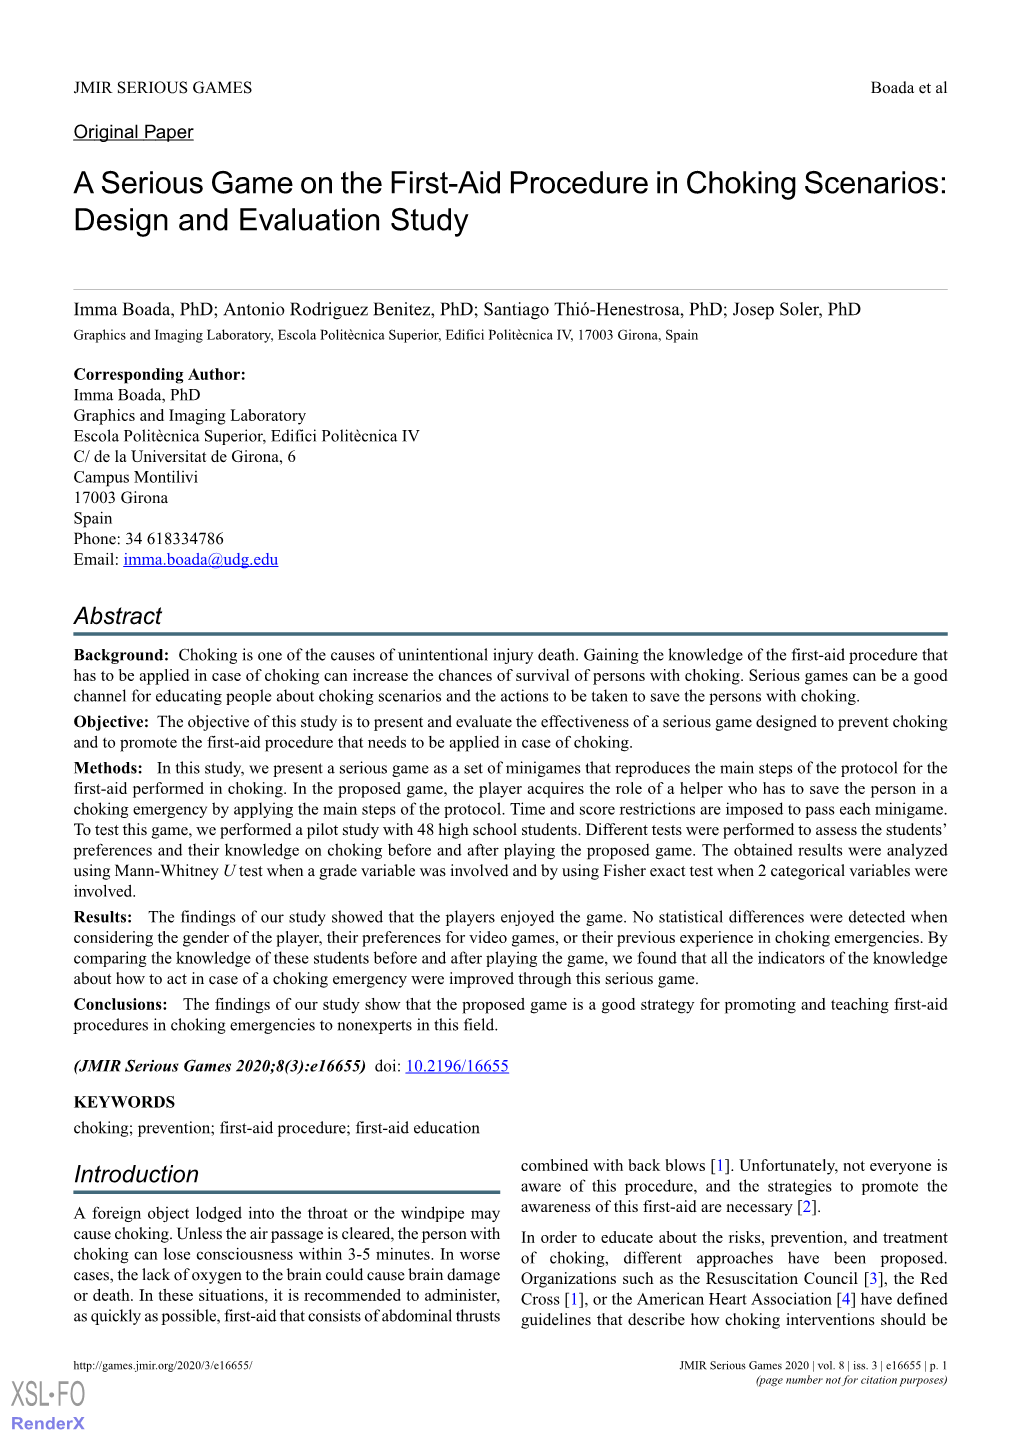 A Serious Game on the First-Aid Procedure in Choking Scenarios: Design and Evaluation Study